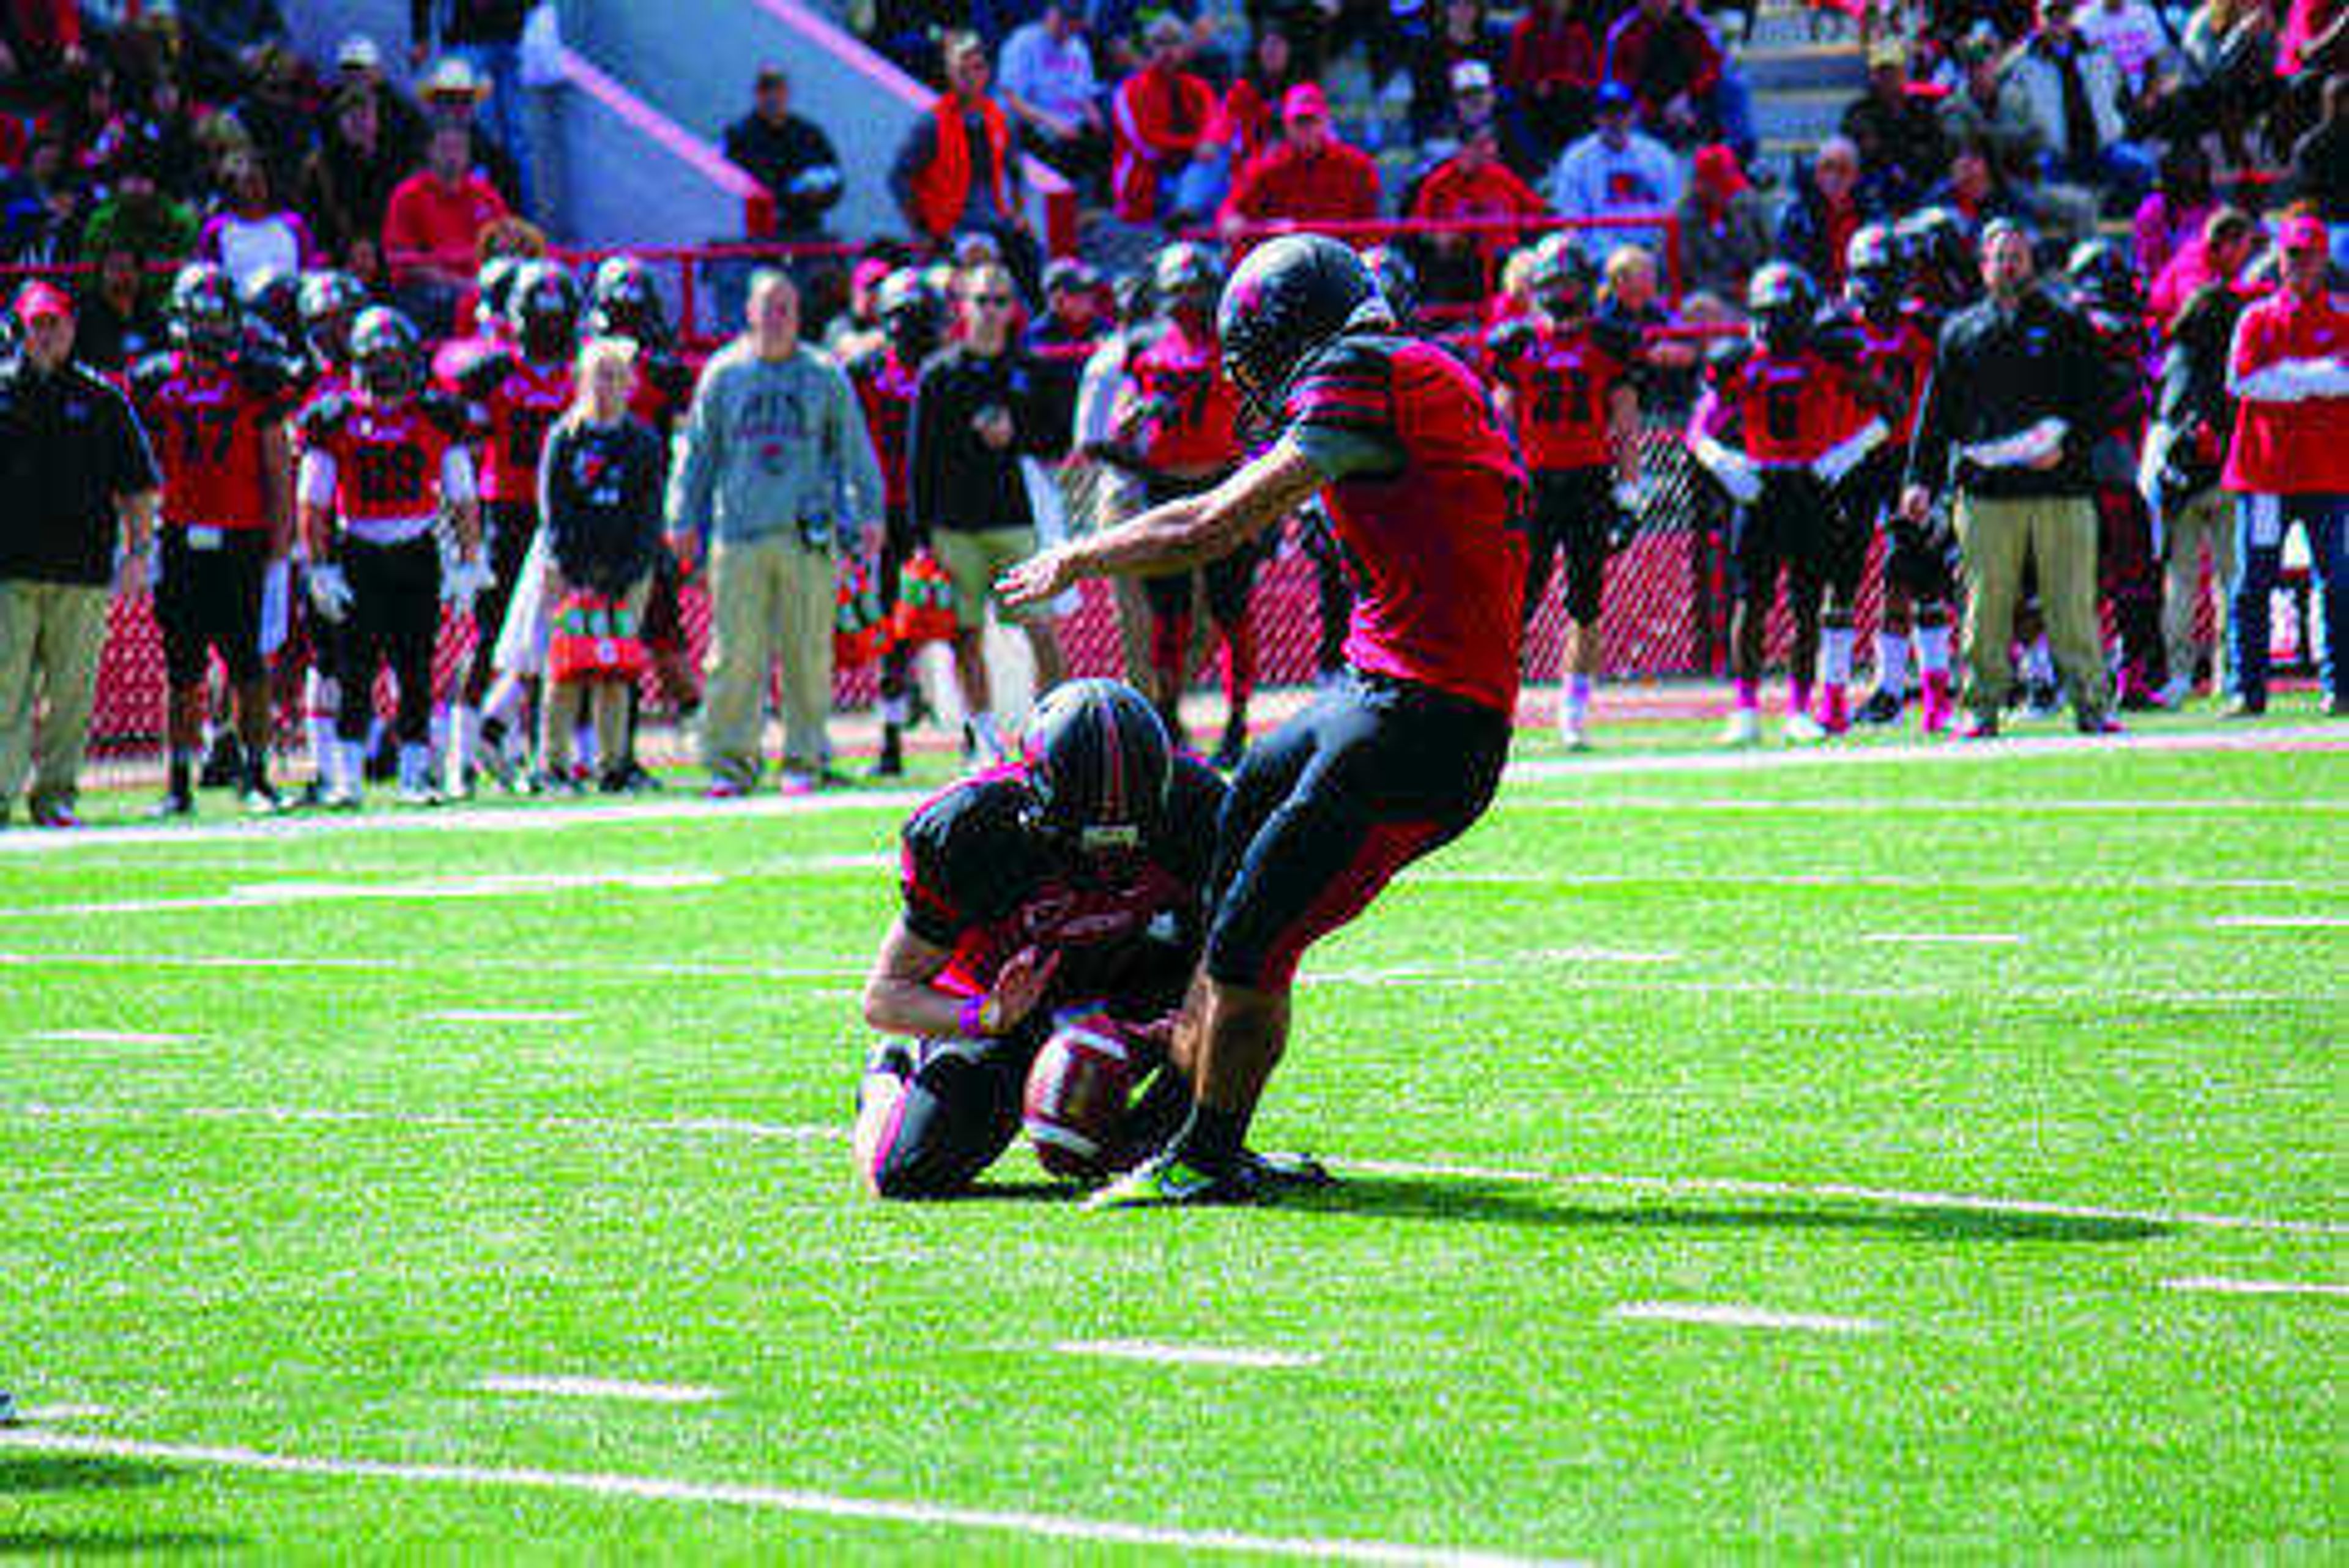 Ryan McCrum attempting a field goal against Eastern Illinois on Oct. 18 at Houck Stadium. Photo by J.C. Reeves